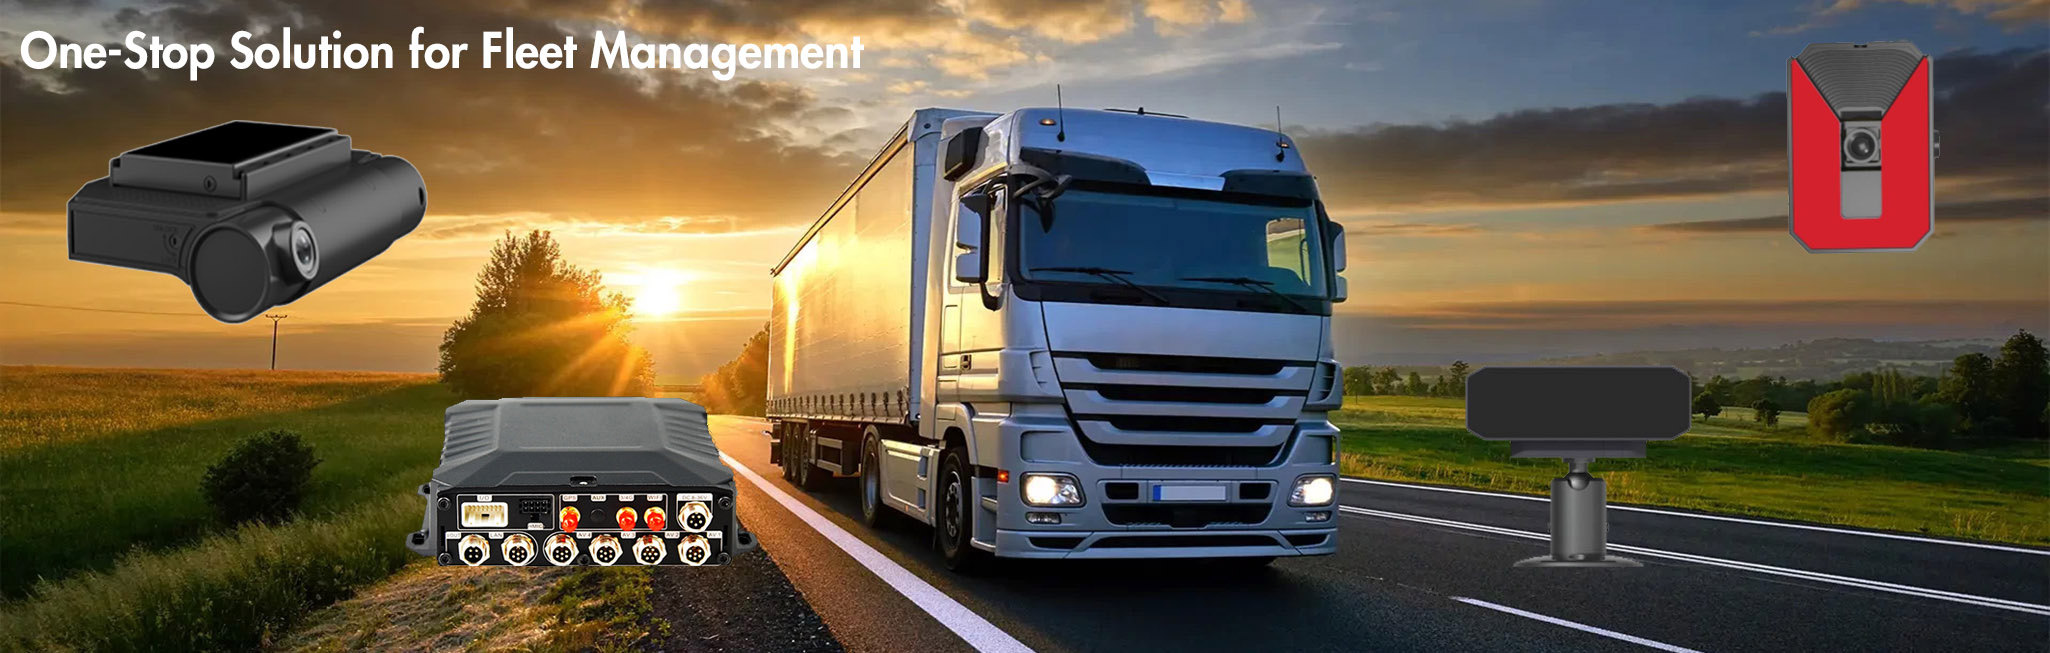 One-stop solution for fleet management